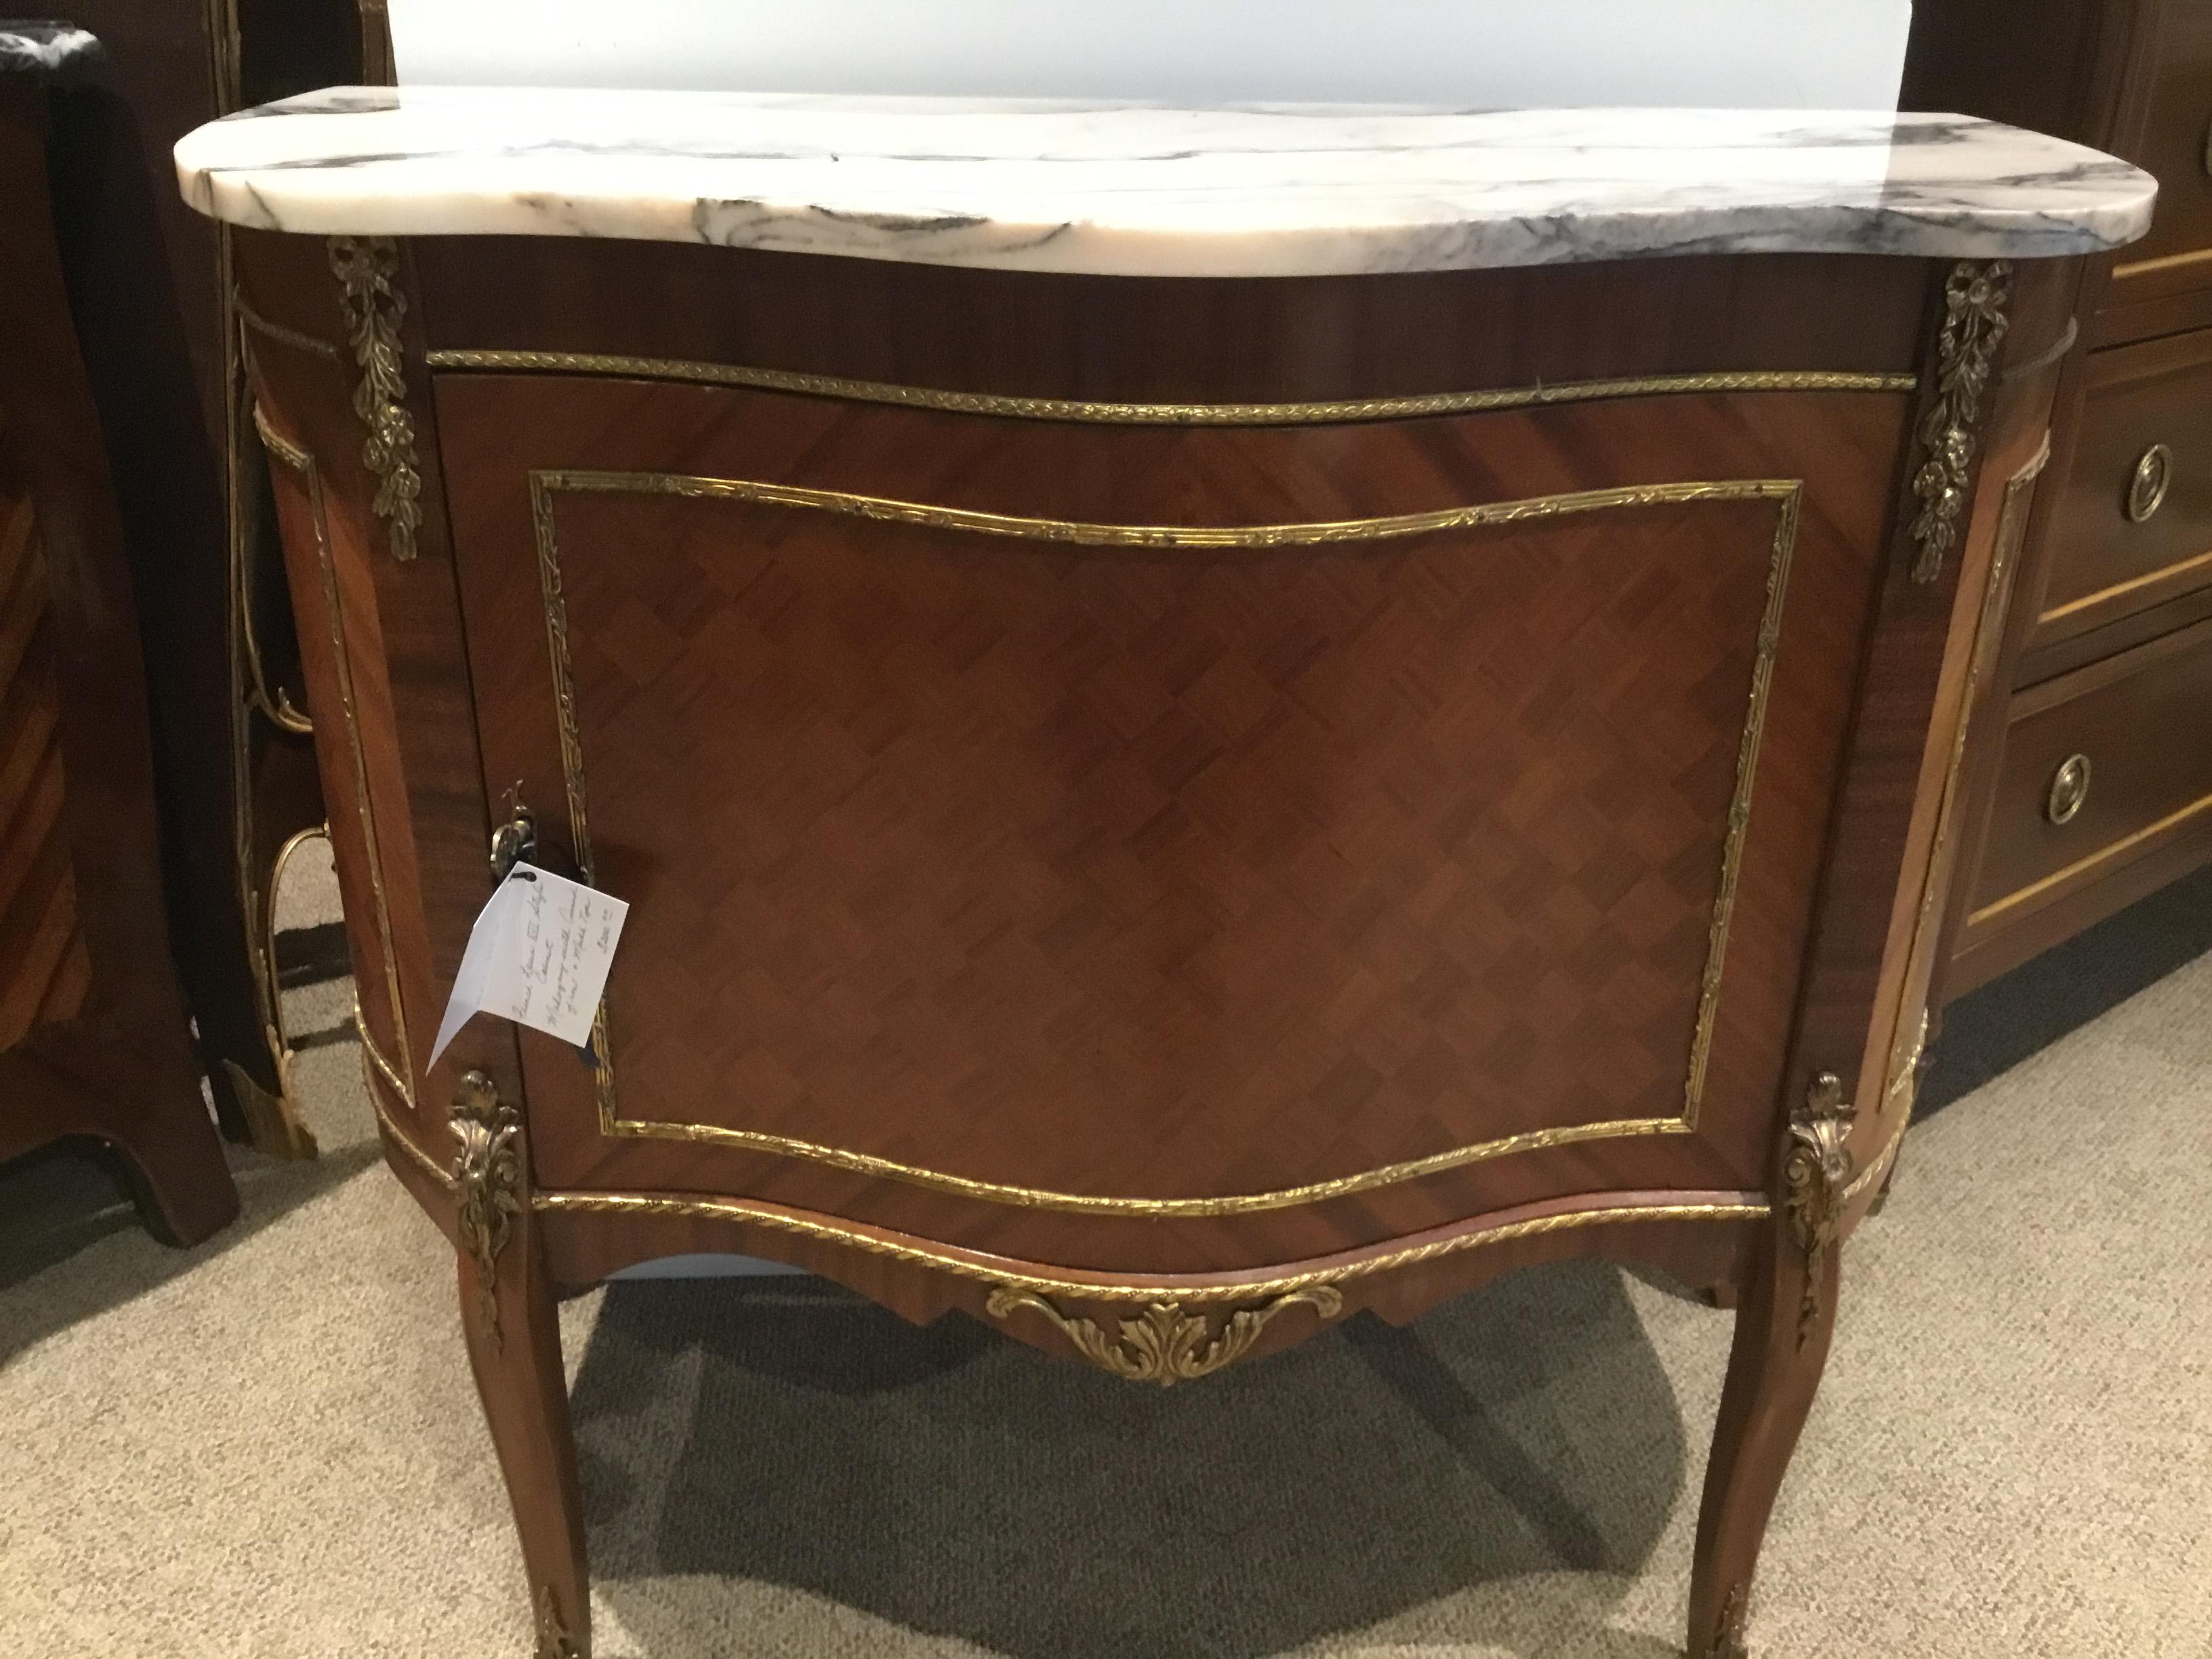 French serpentine shaped cabinet with a marble top with pale gray and
Pale blush color. The marquetry inlay is in superb condition and enhances
This piece on the front and both sides. Bronze doré appliqués decorate
This beautiful cabinet.